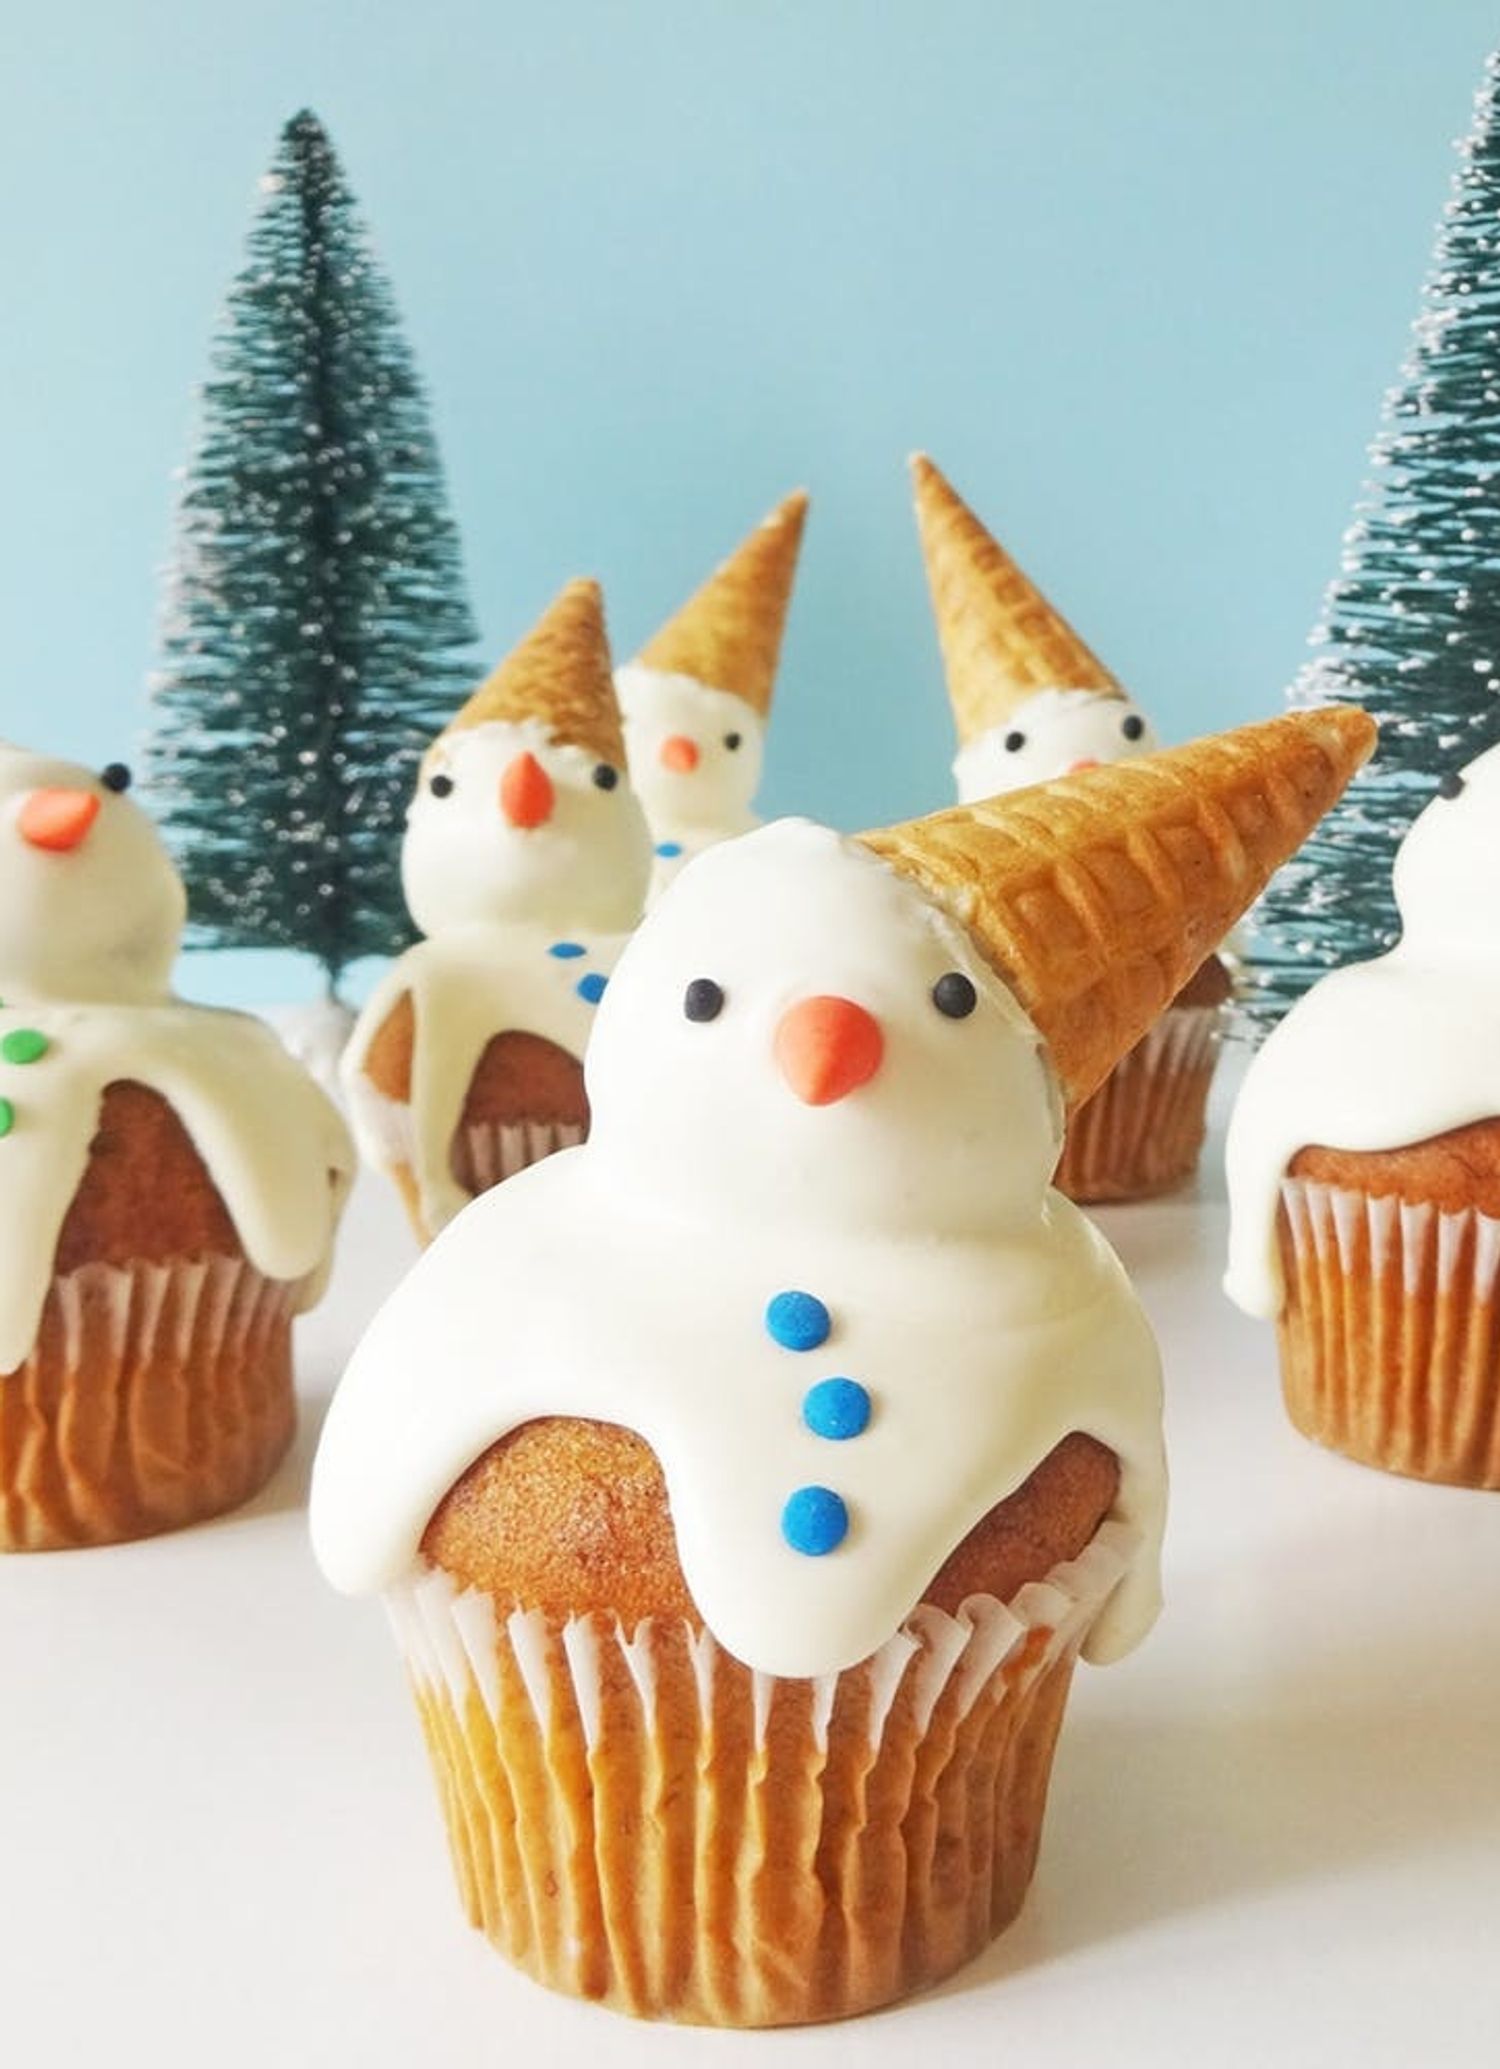 These Adorable Snowmen Cupcakes Will Make You Melt - Brit + Co